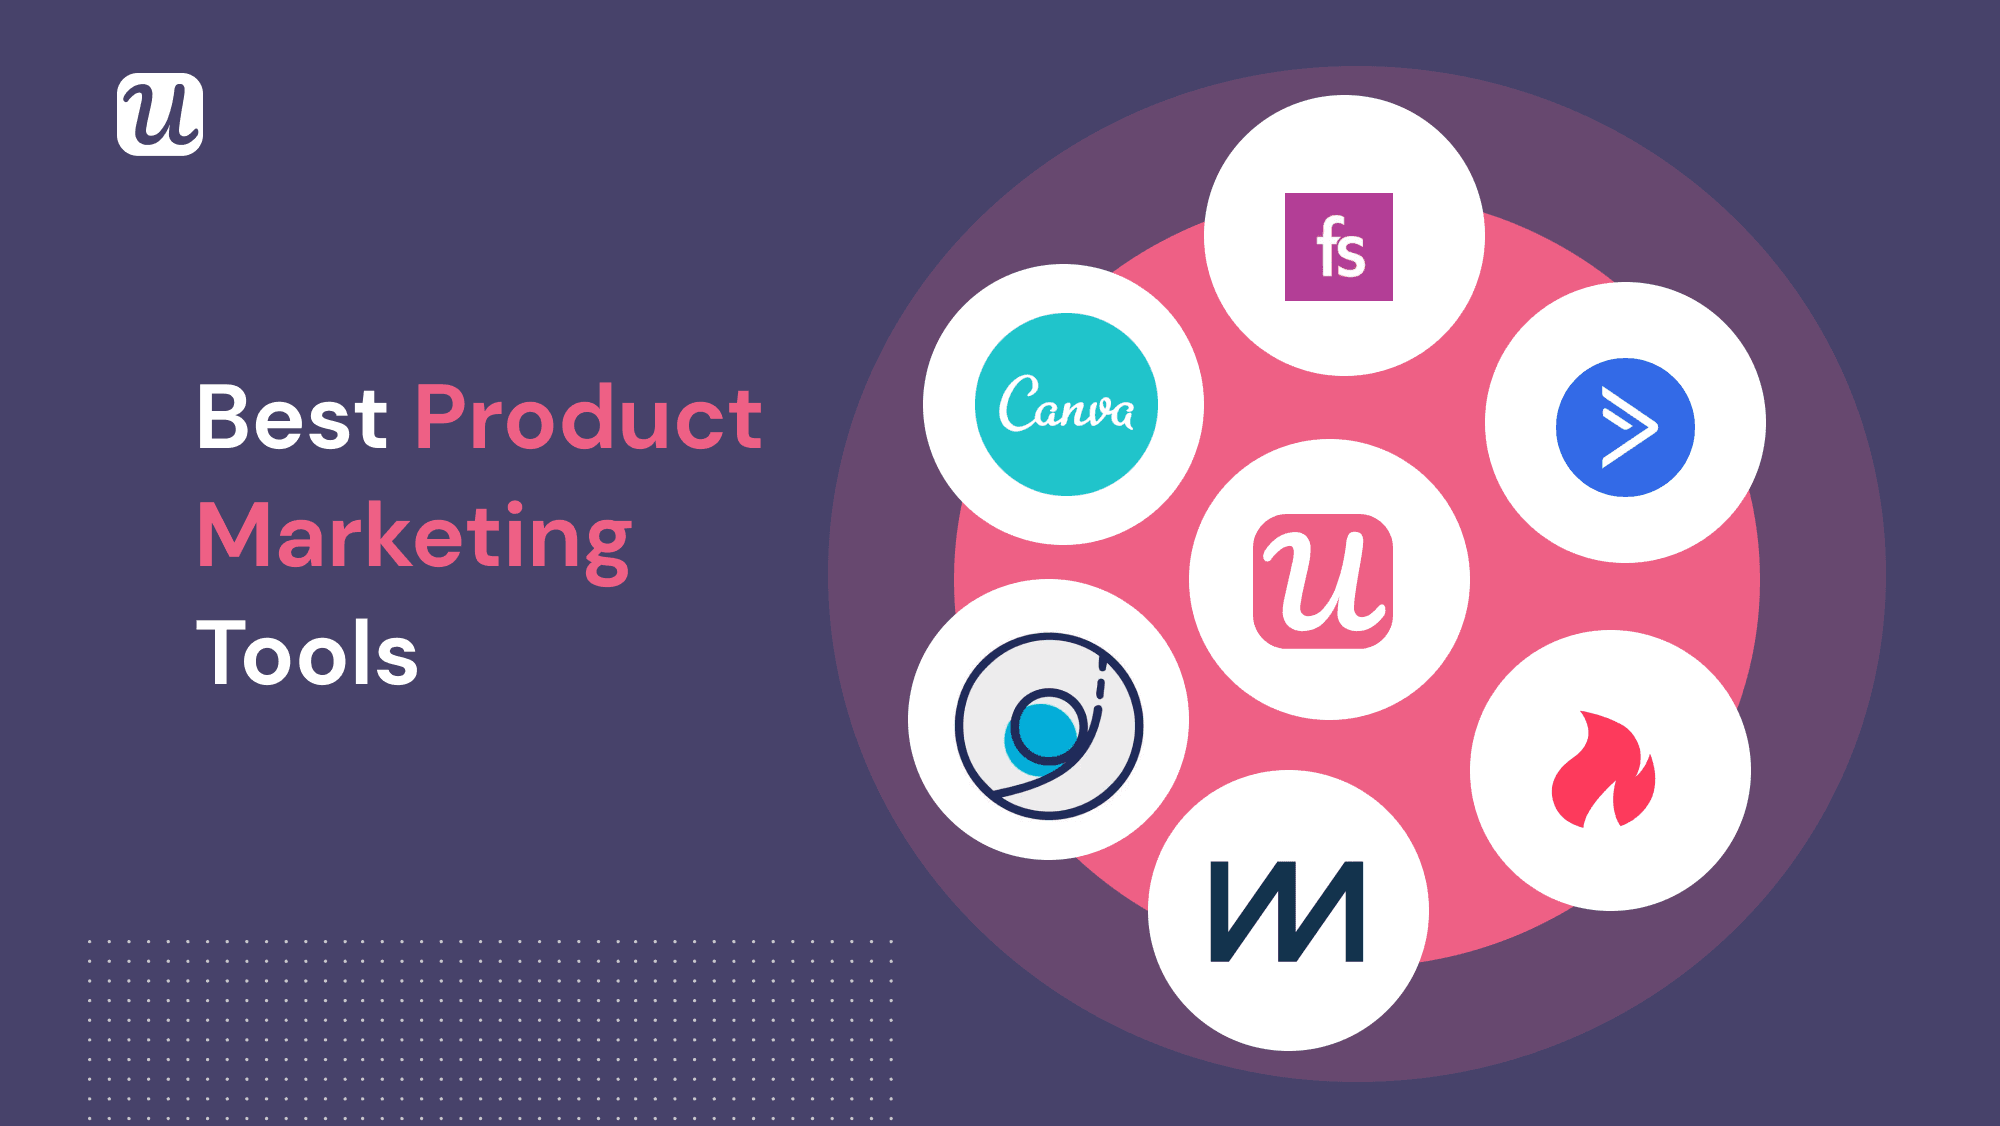 10 Must-Have Code-Free Product Marketing Tools - The Only Tools You’ll Really Need As a Product Marketers